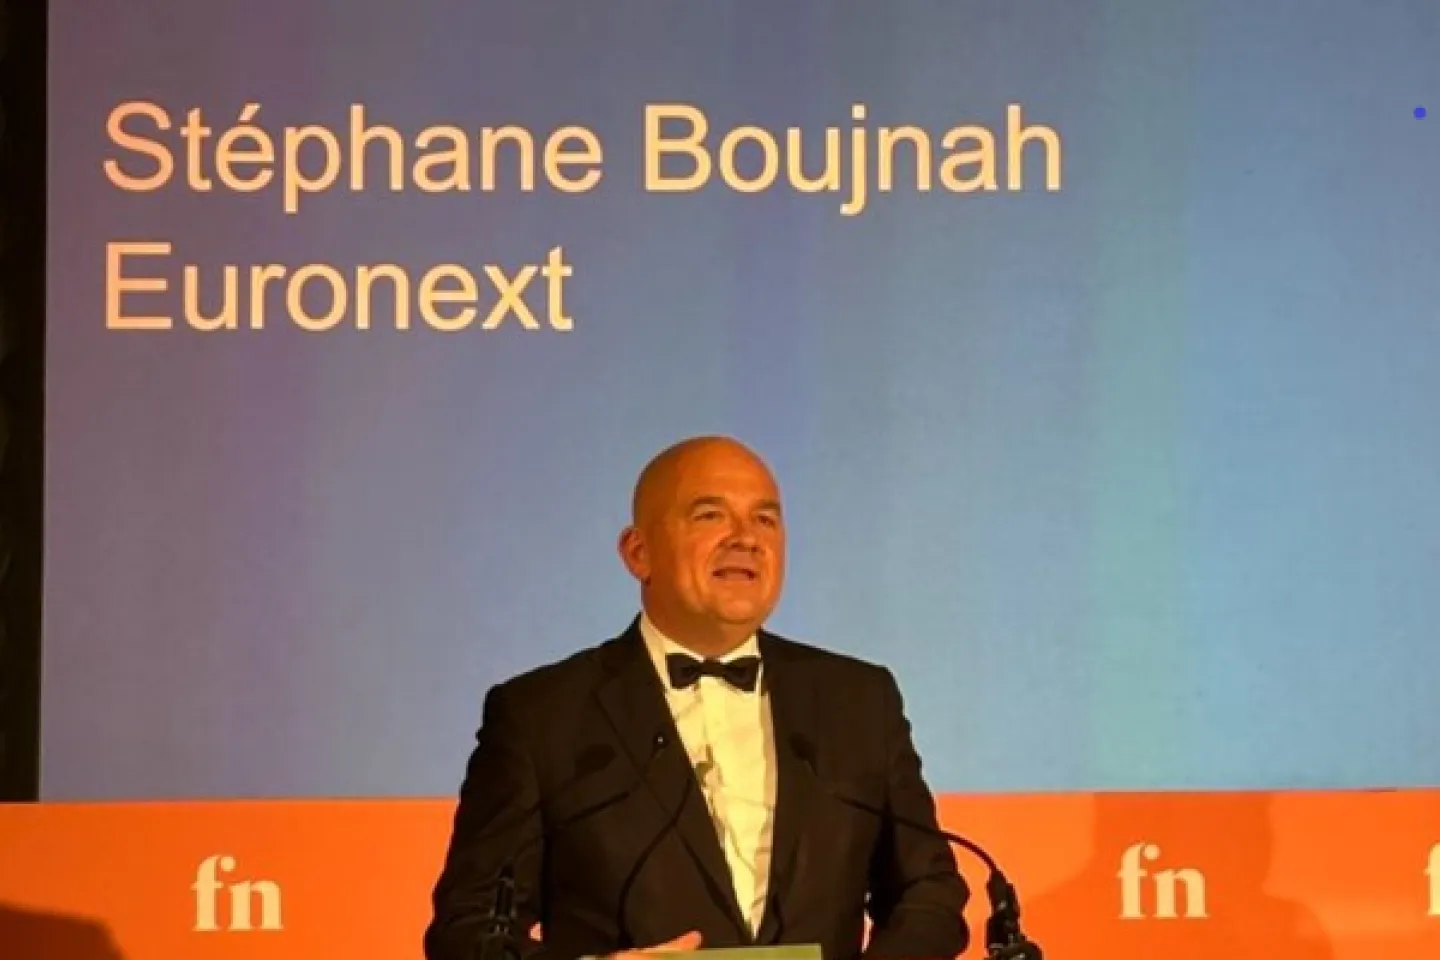 Euronext CEO Stephane Boujnah speaking at awards ceremony